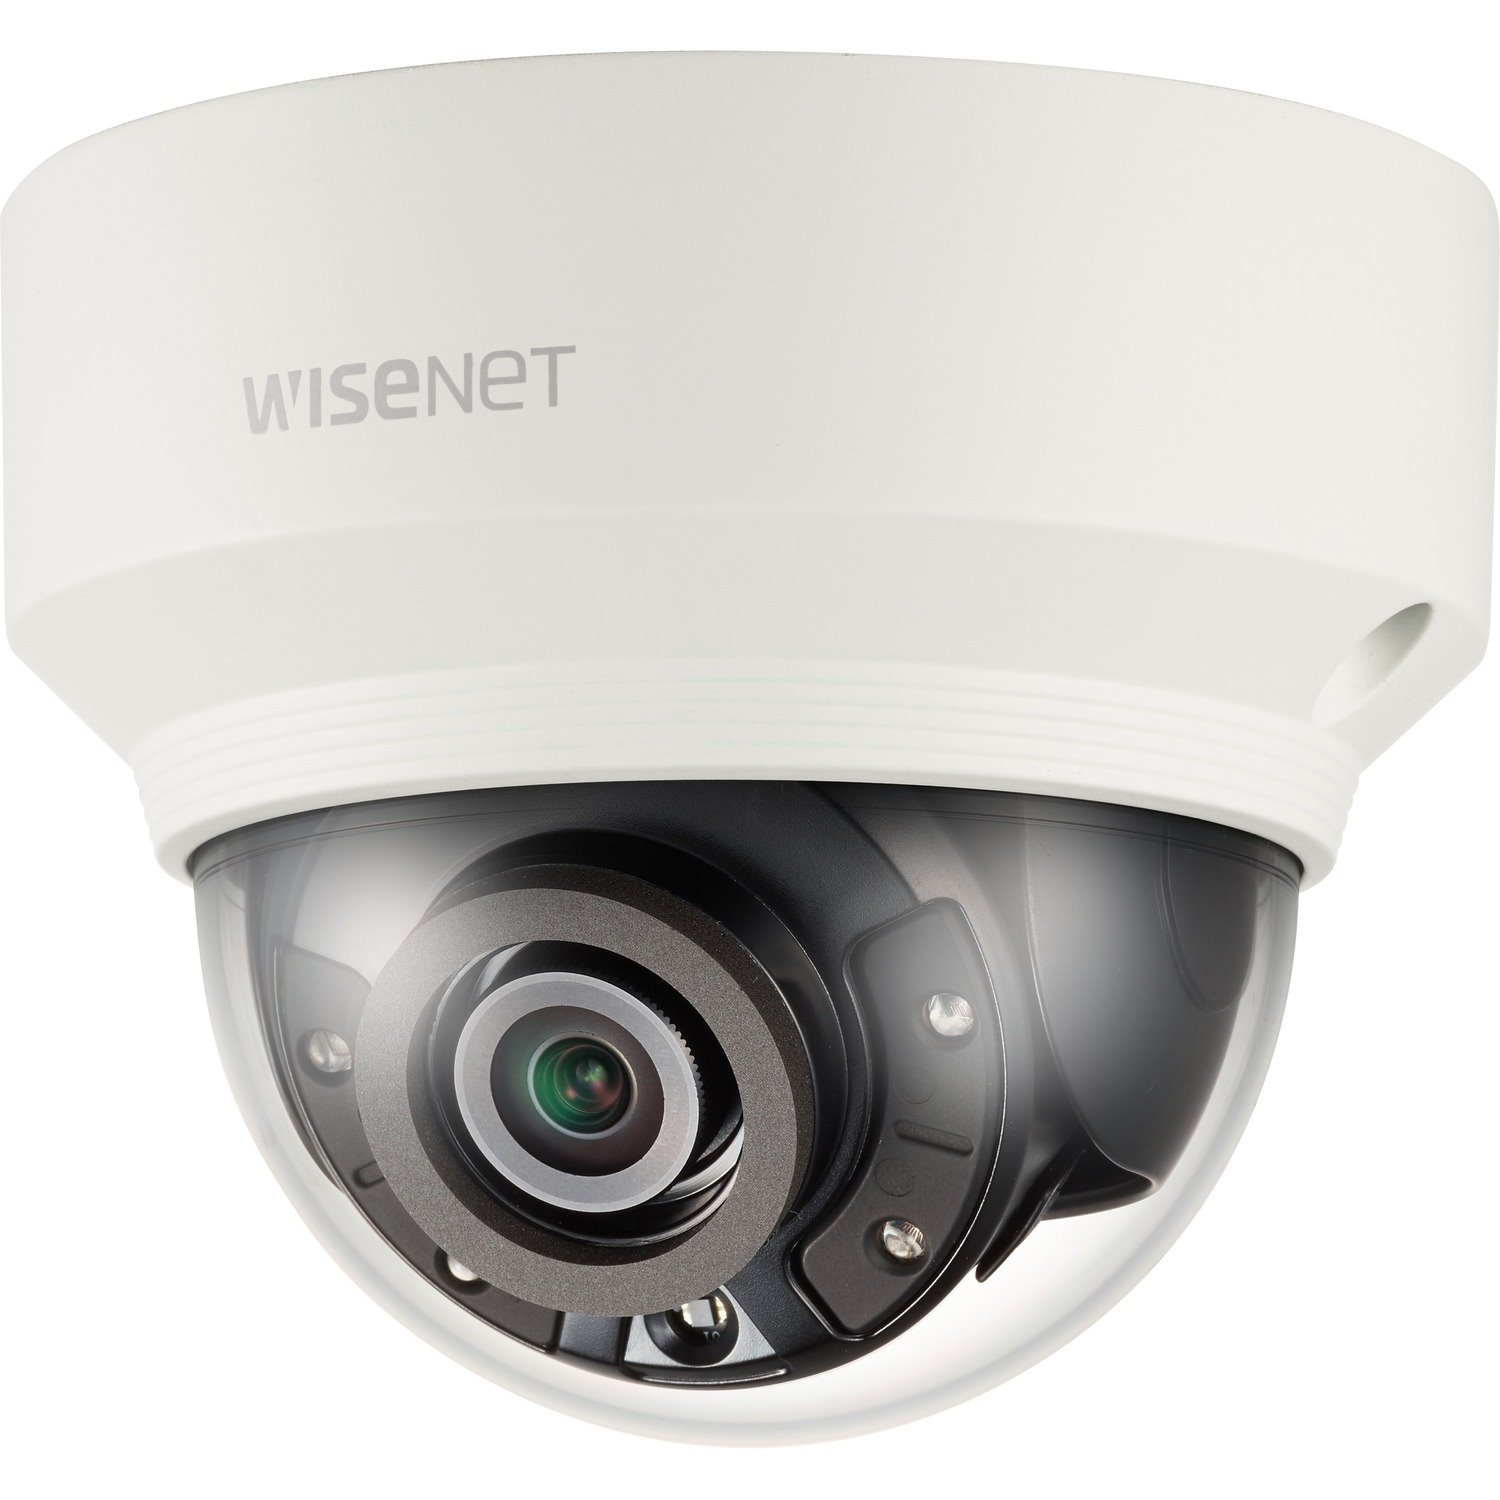 Wisenet XND-8020R 5 Megapixel HD Network Camera - Colour - Dome